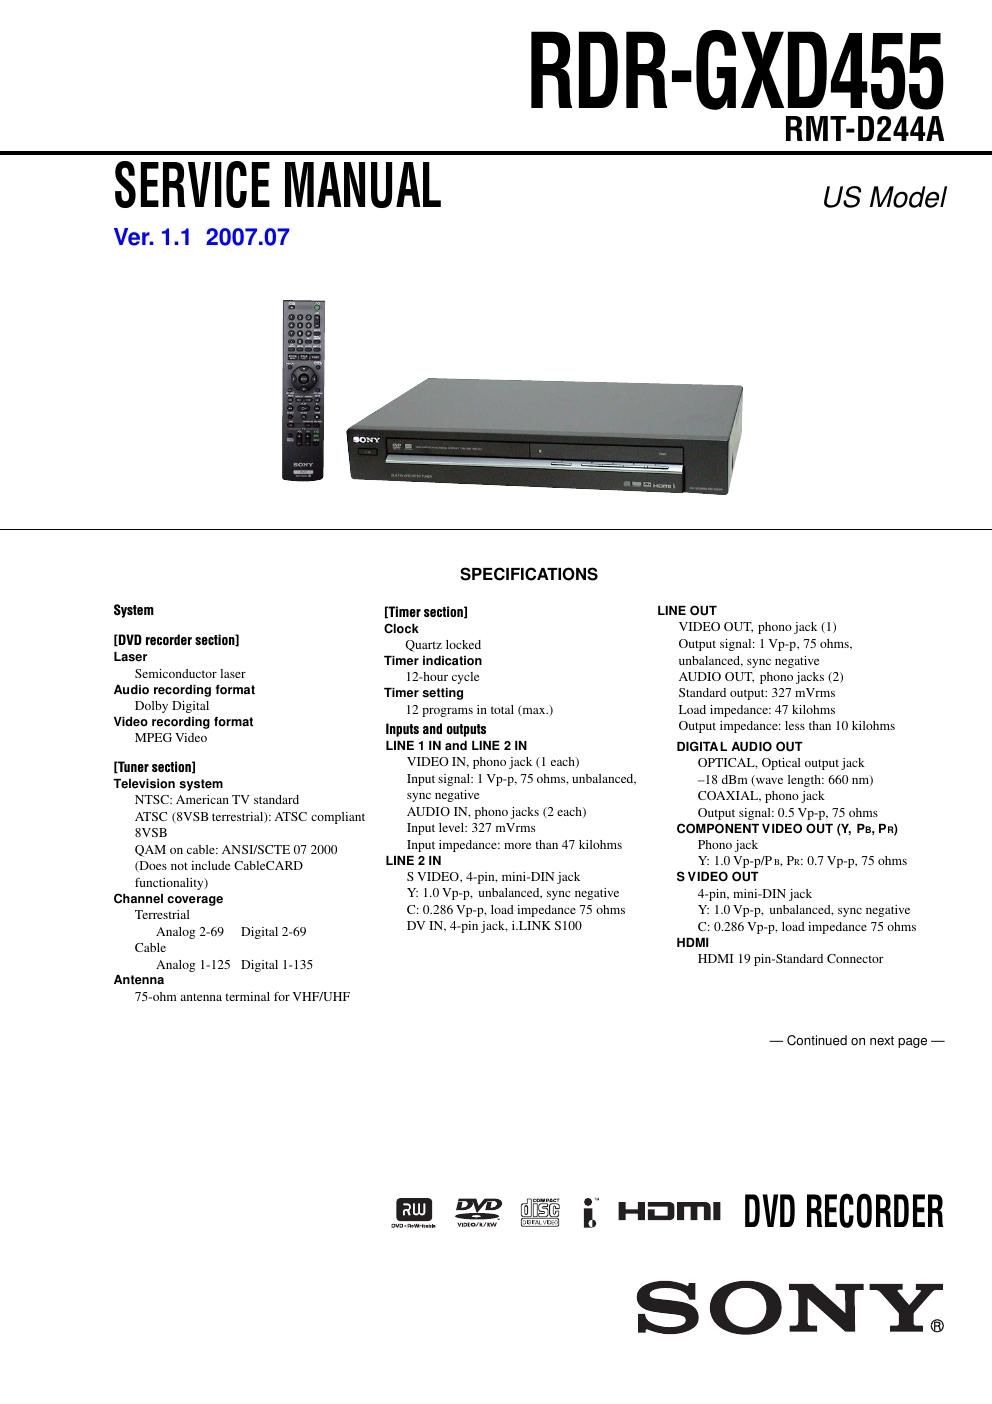 sony rdr gxd 455 service manual